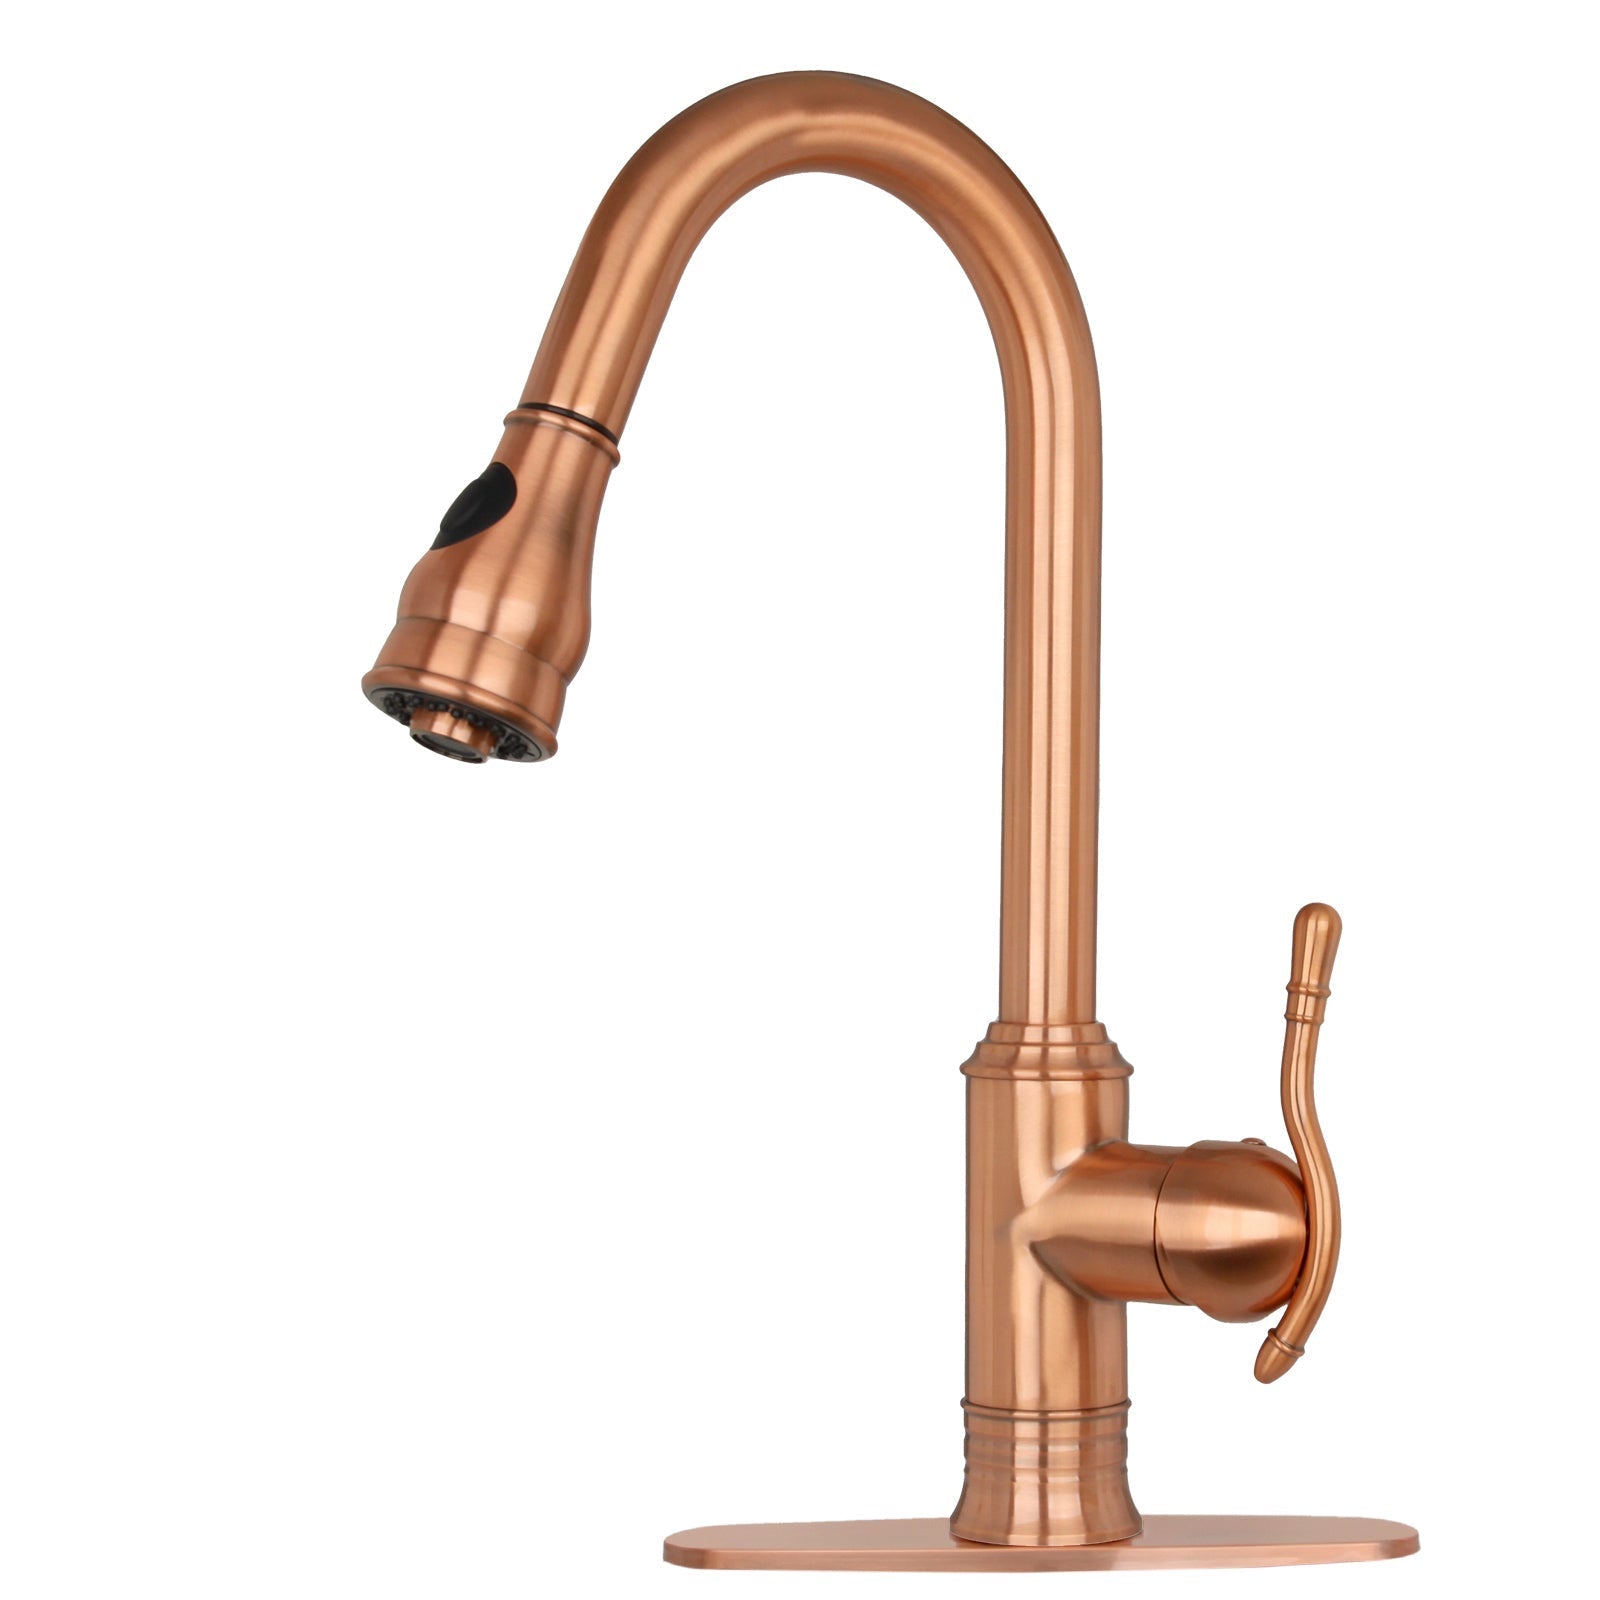 Oil Rubbed Bronze Pull Out Kitchen Faucet, Single Level Solid Brass Kitchen Sink Faucets with Pull Down Sprayer - AK96415-D-ORB